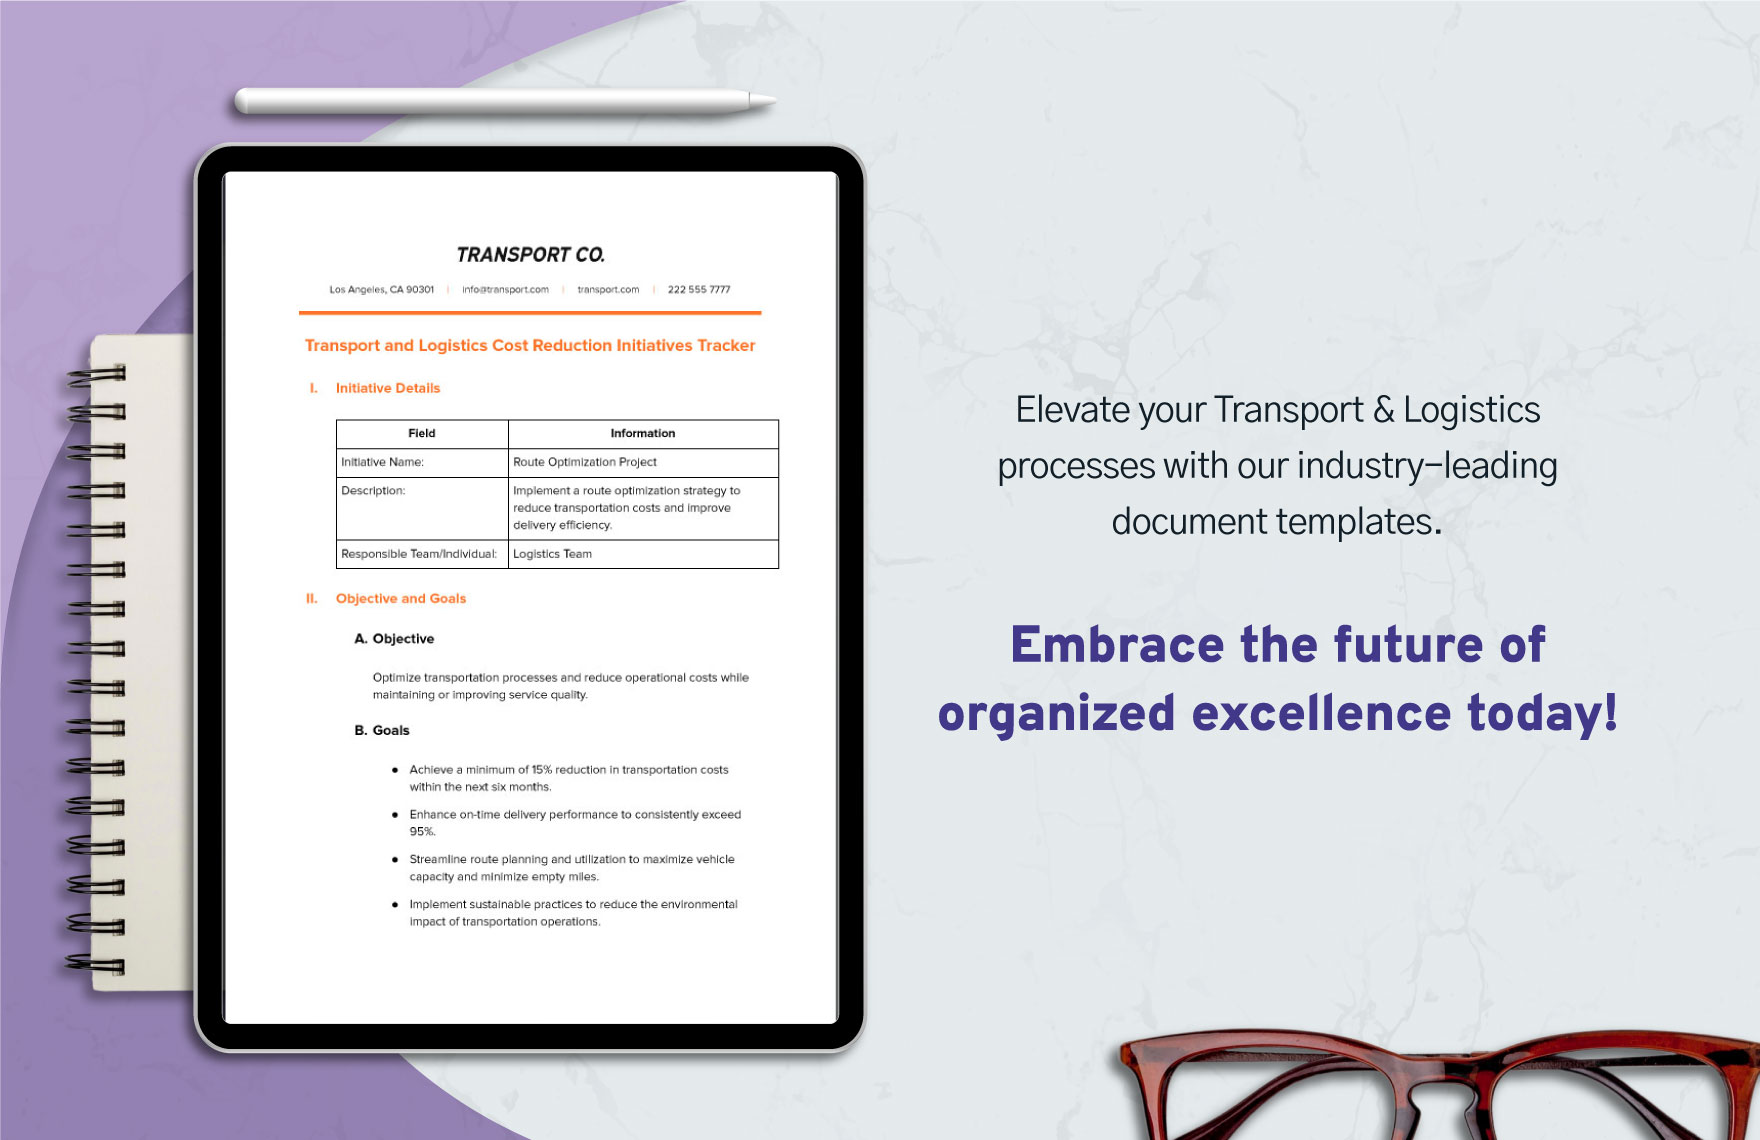 Transport and Logistics Cost Reduction Initiatives Tracker Template